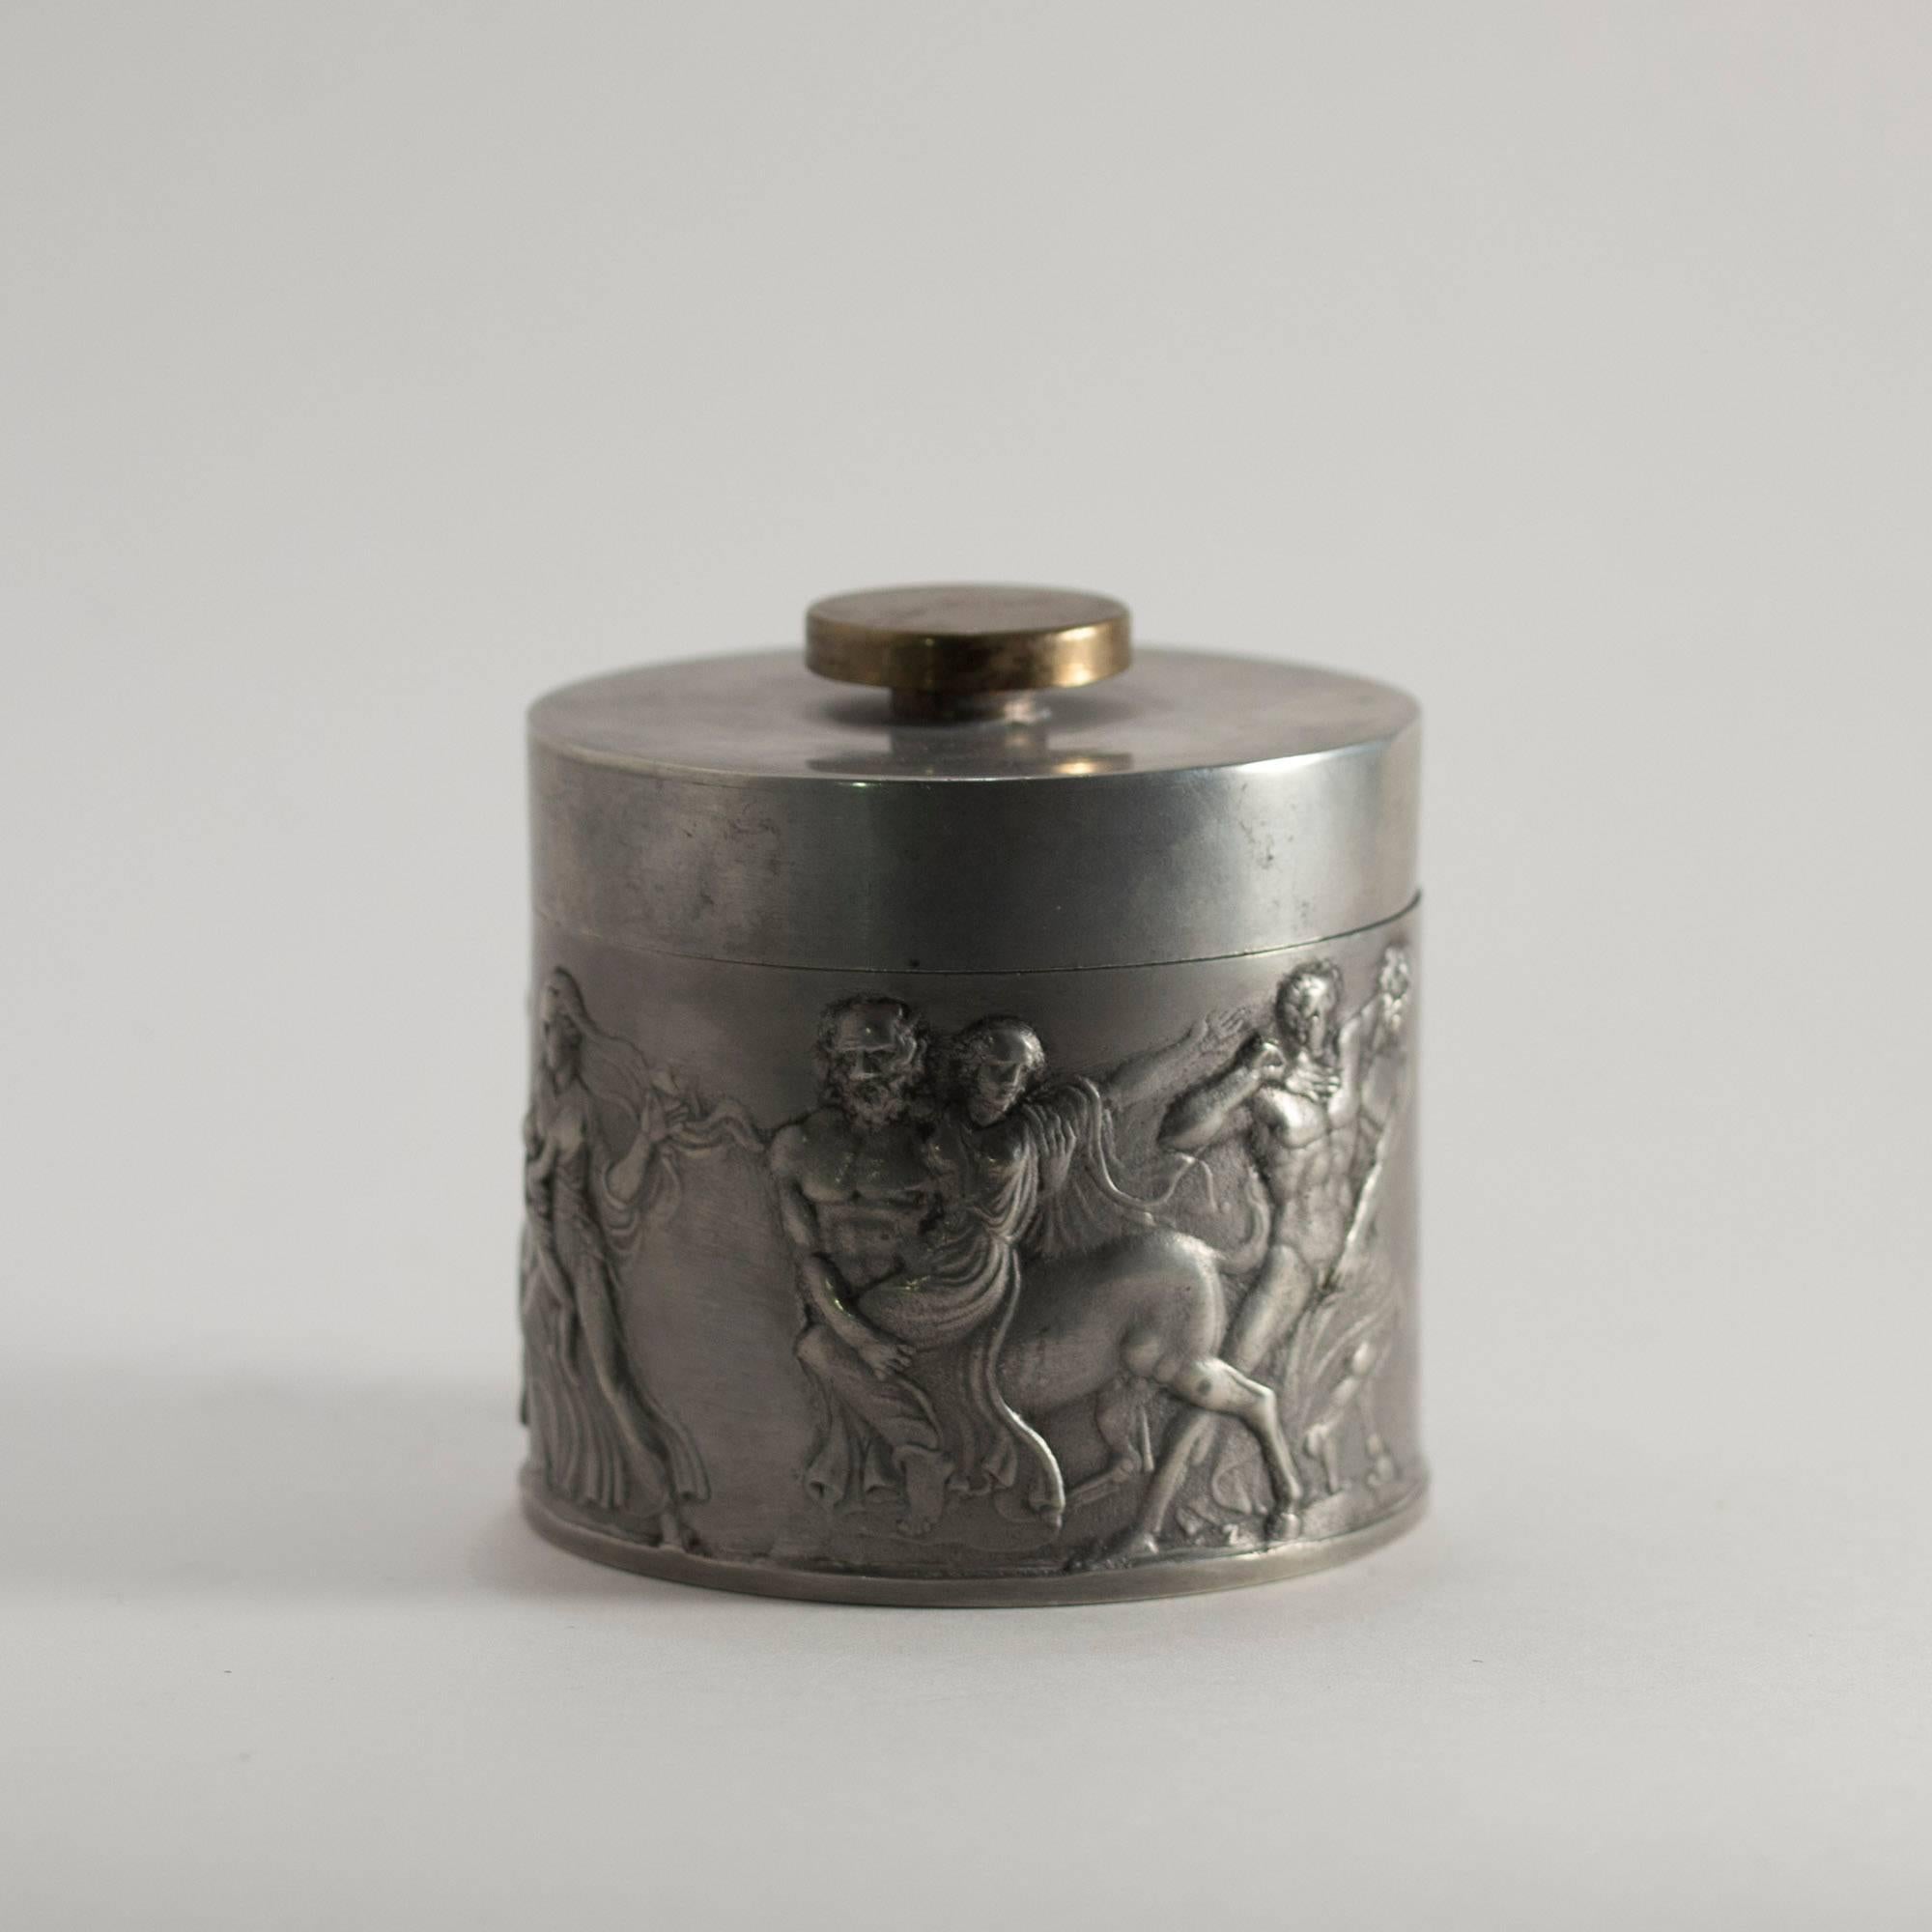 Pewter jar with brass knob and inset in four sections. Designed by Herman Bergman, who was the founder of Herman Bergman's Fine Art Foundry, purveyor to the Royal Court. A dramatic scene with centaurs, a warrior and a woman with a baby is depicted